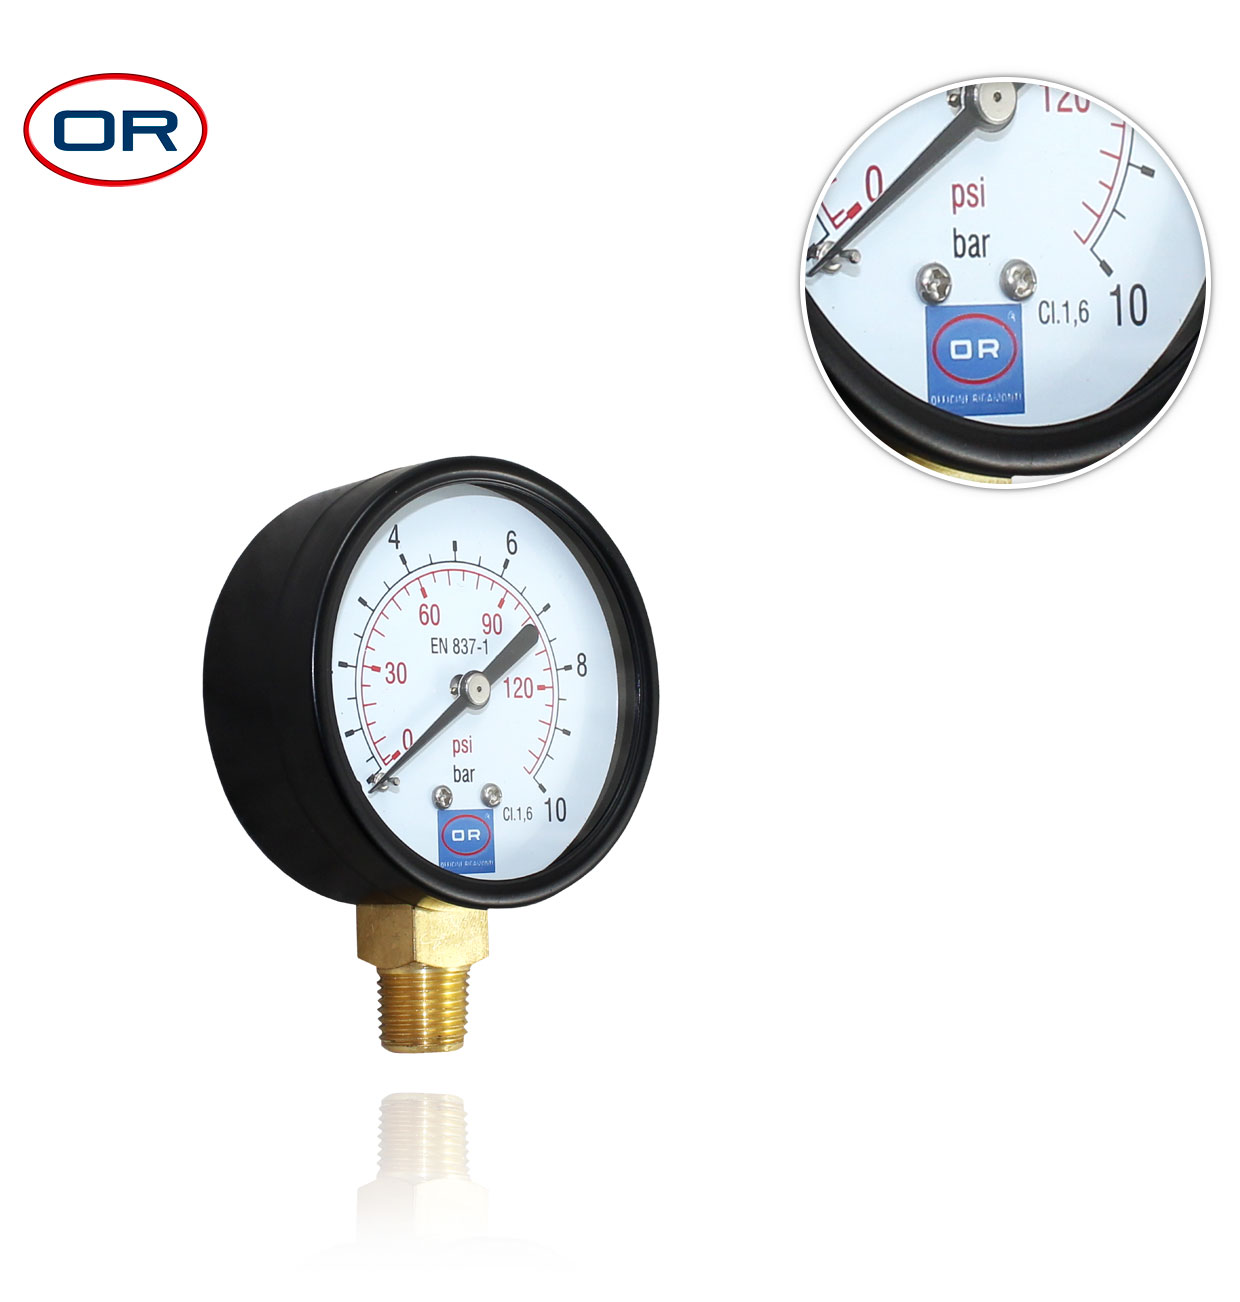 D63 0-10bar R1/4" RADIAL MANOMETER WITH ABS O-RING